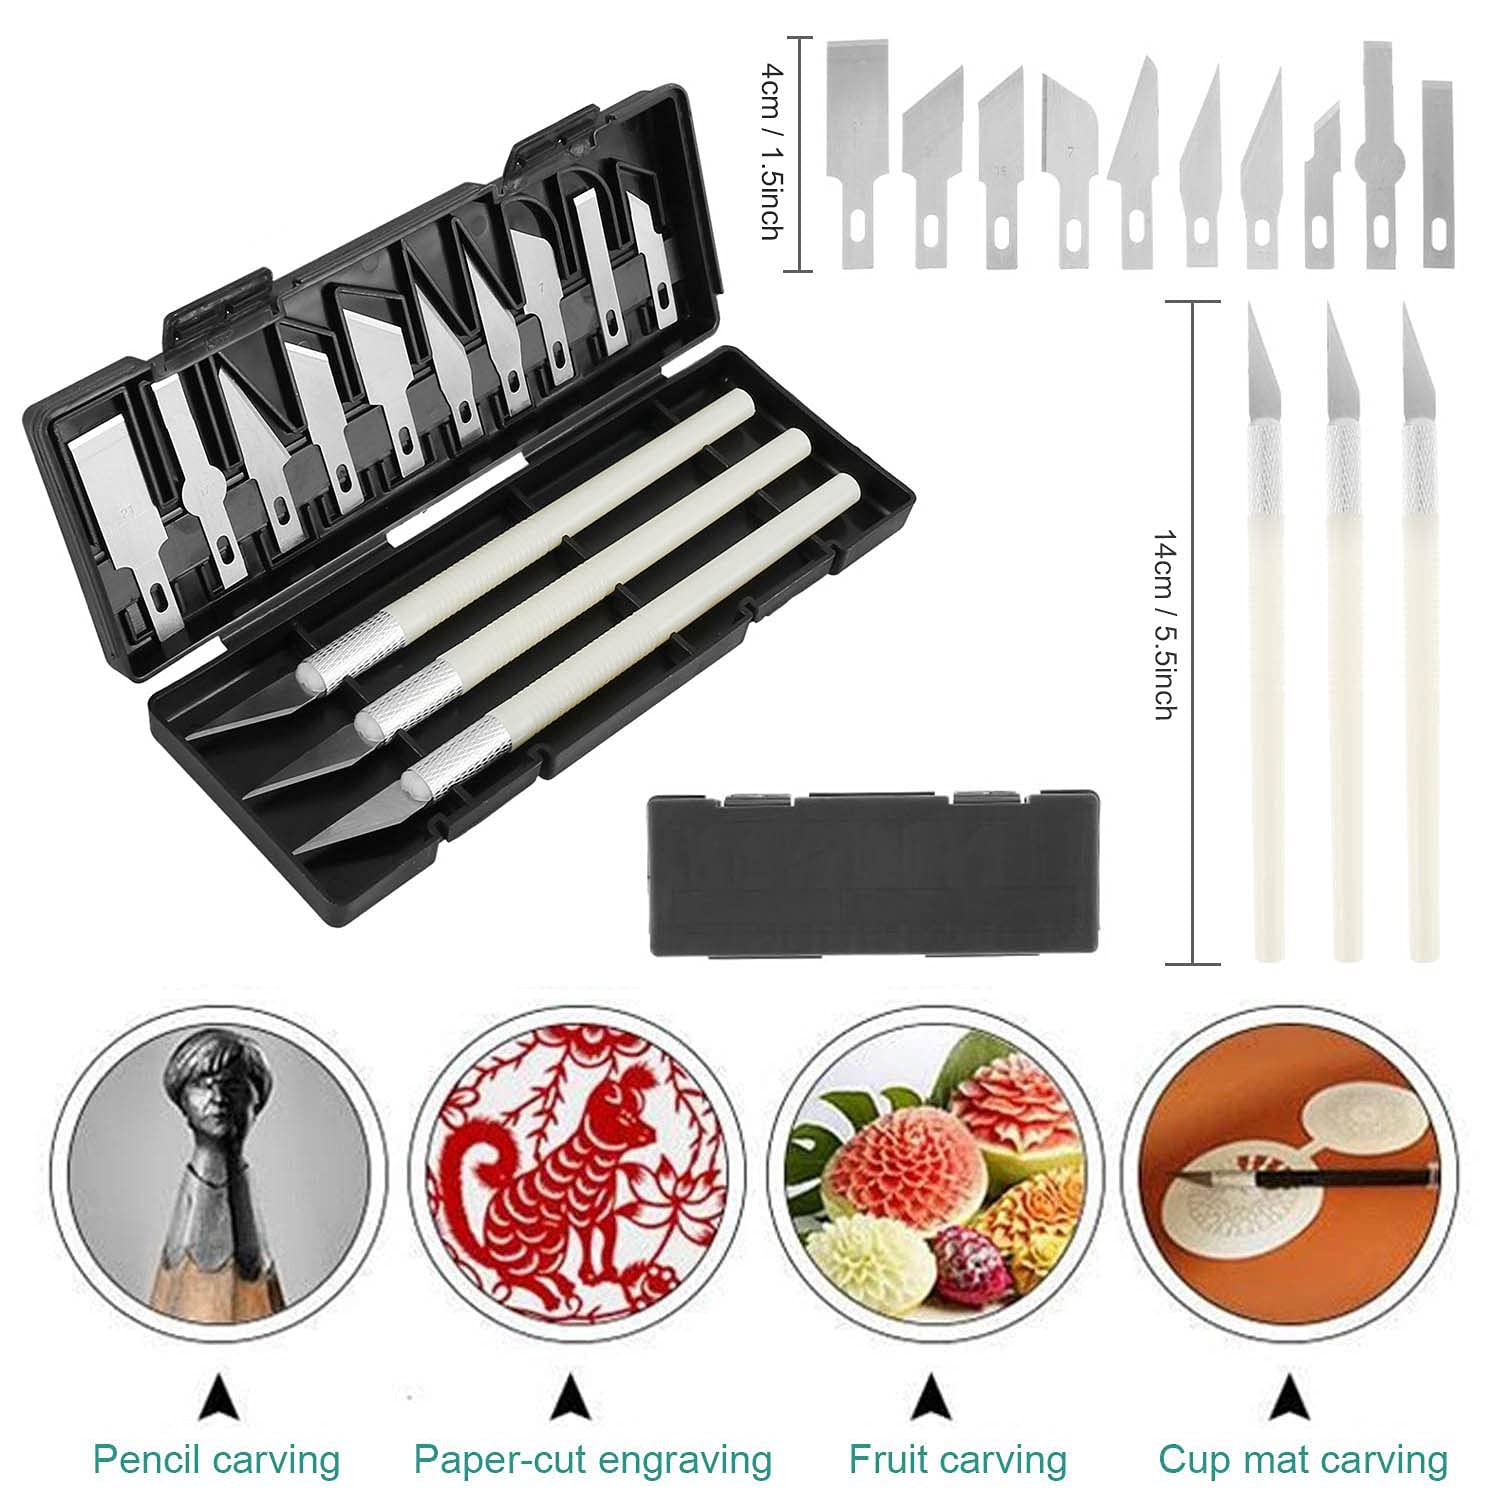 32-piece-3d-print-tool-kit-includes-debur-tool-cleaning-finishing-and-printing-tool3d-print-accessories-for-cleaning-fin-2 32 Piece 3D Print Tool Kit Review